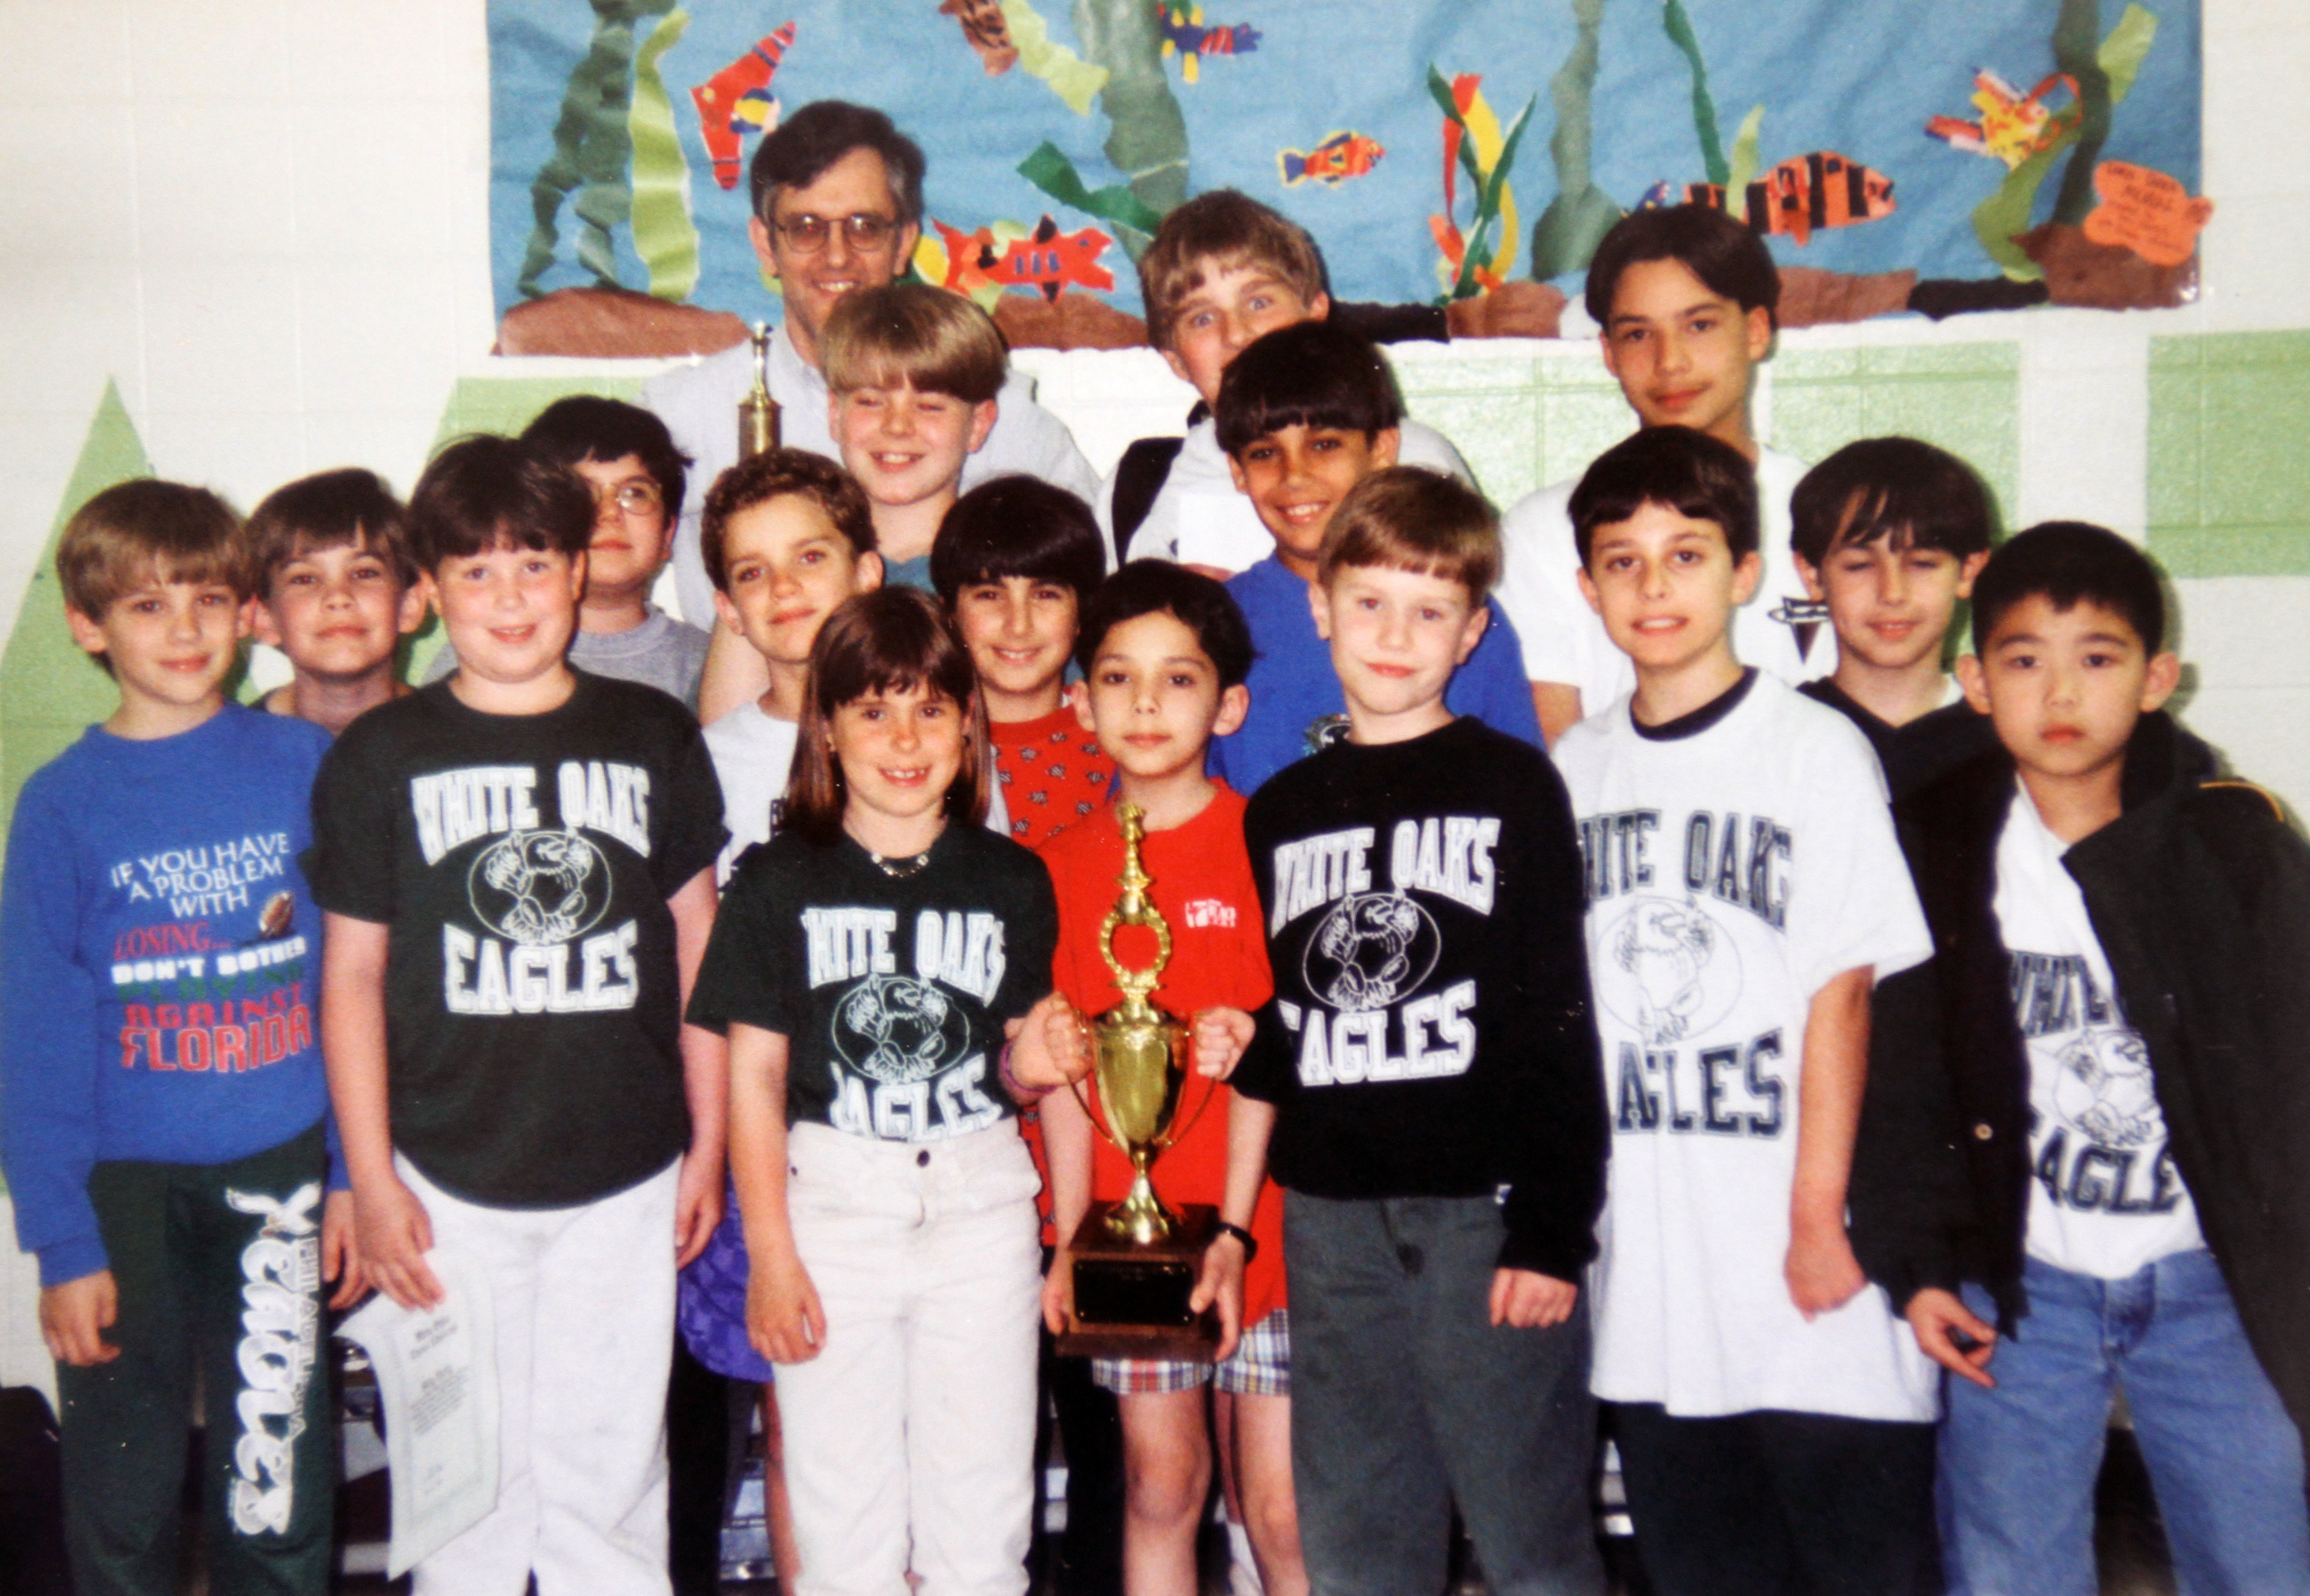 Photograph of the championship-winning chess team posing with their trophy.